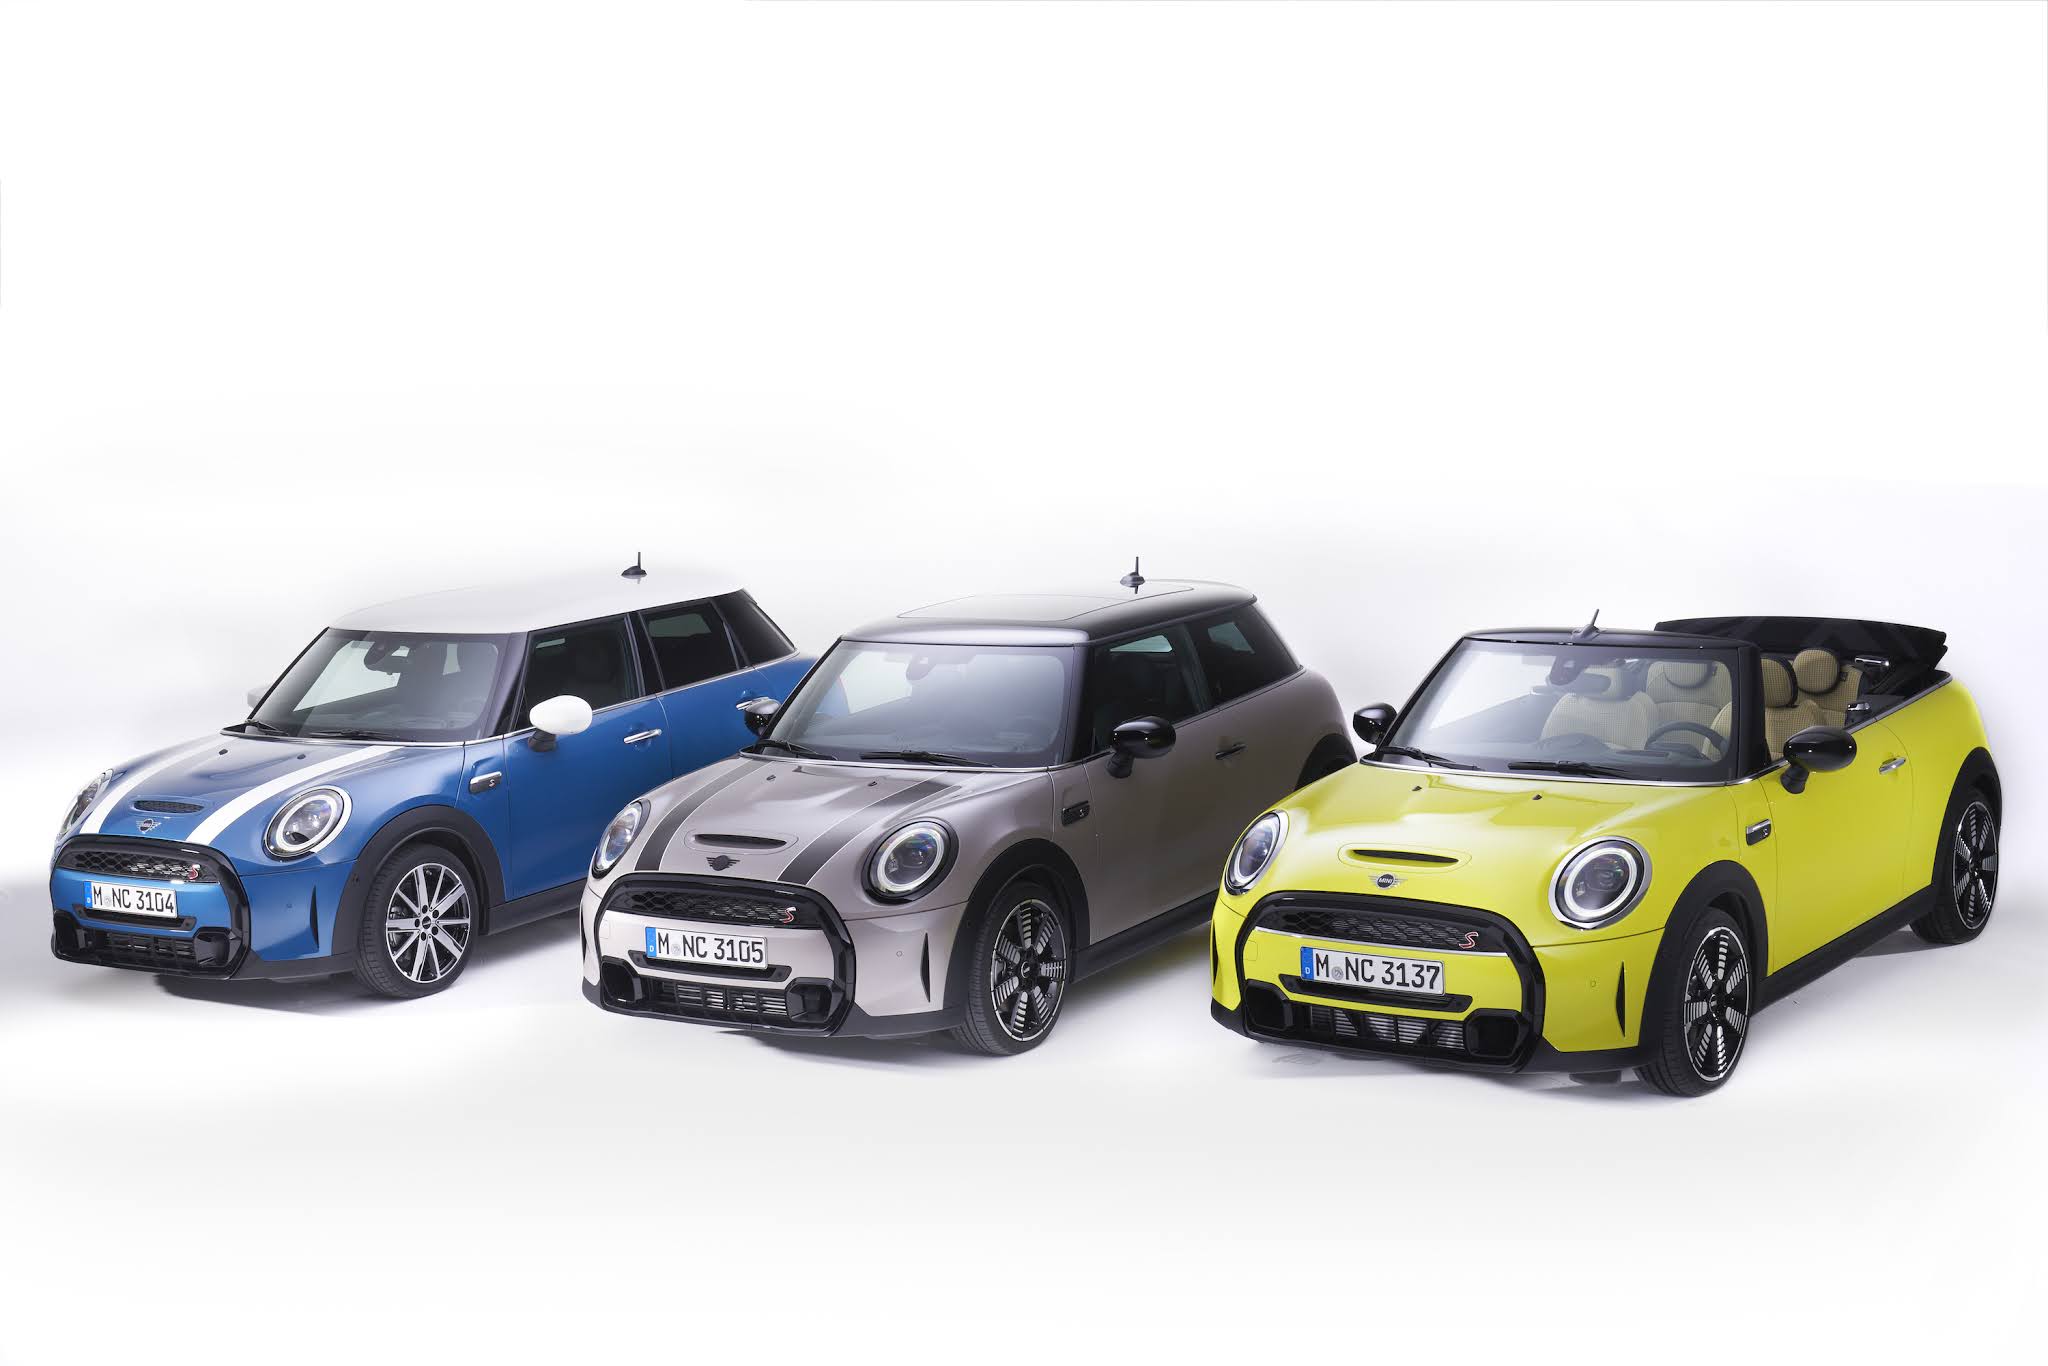 Three new Minis get an intensive makeover